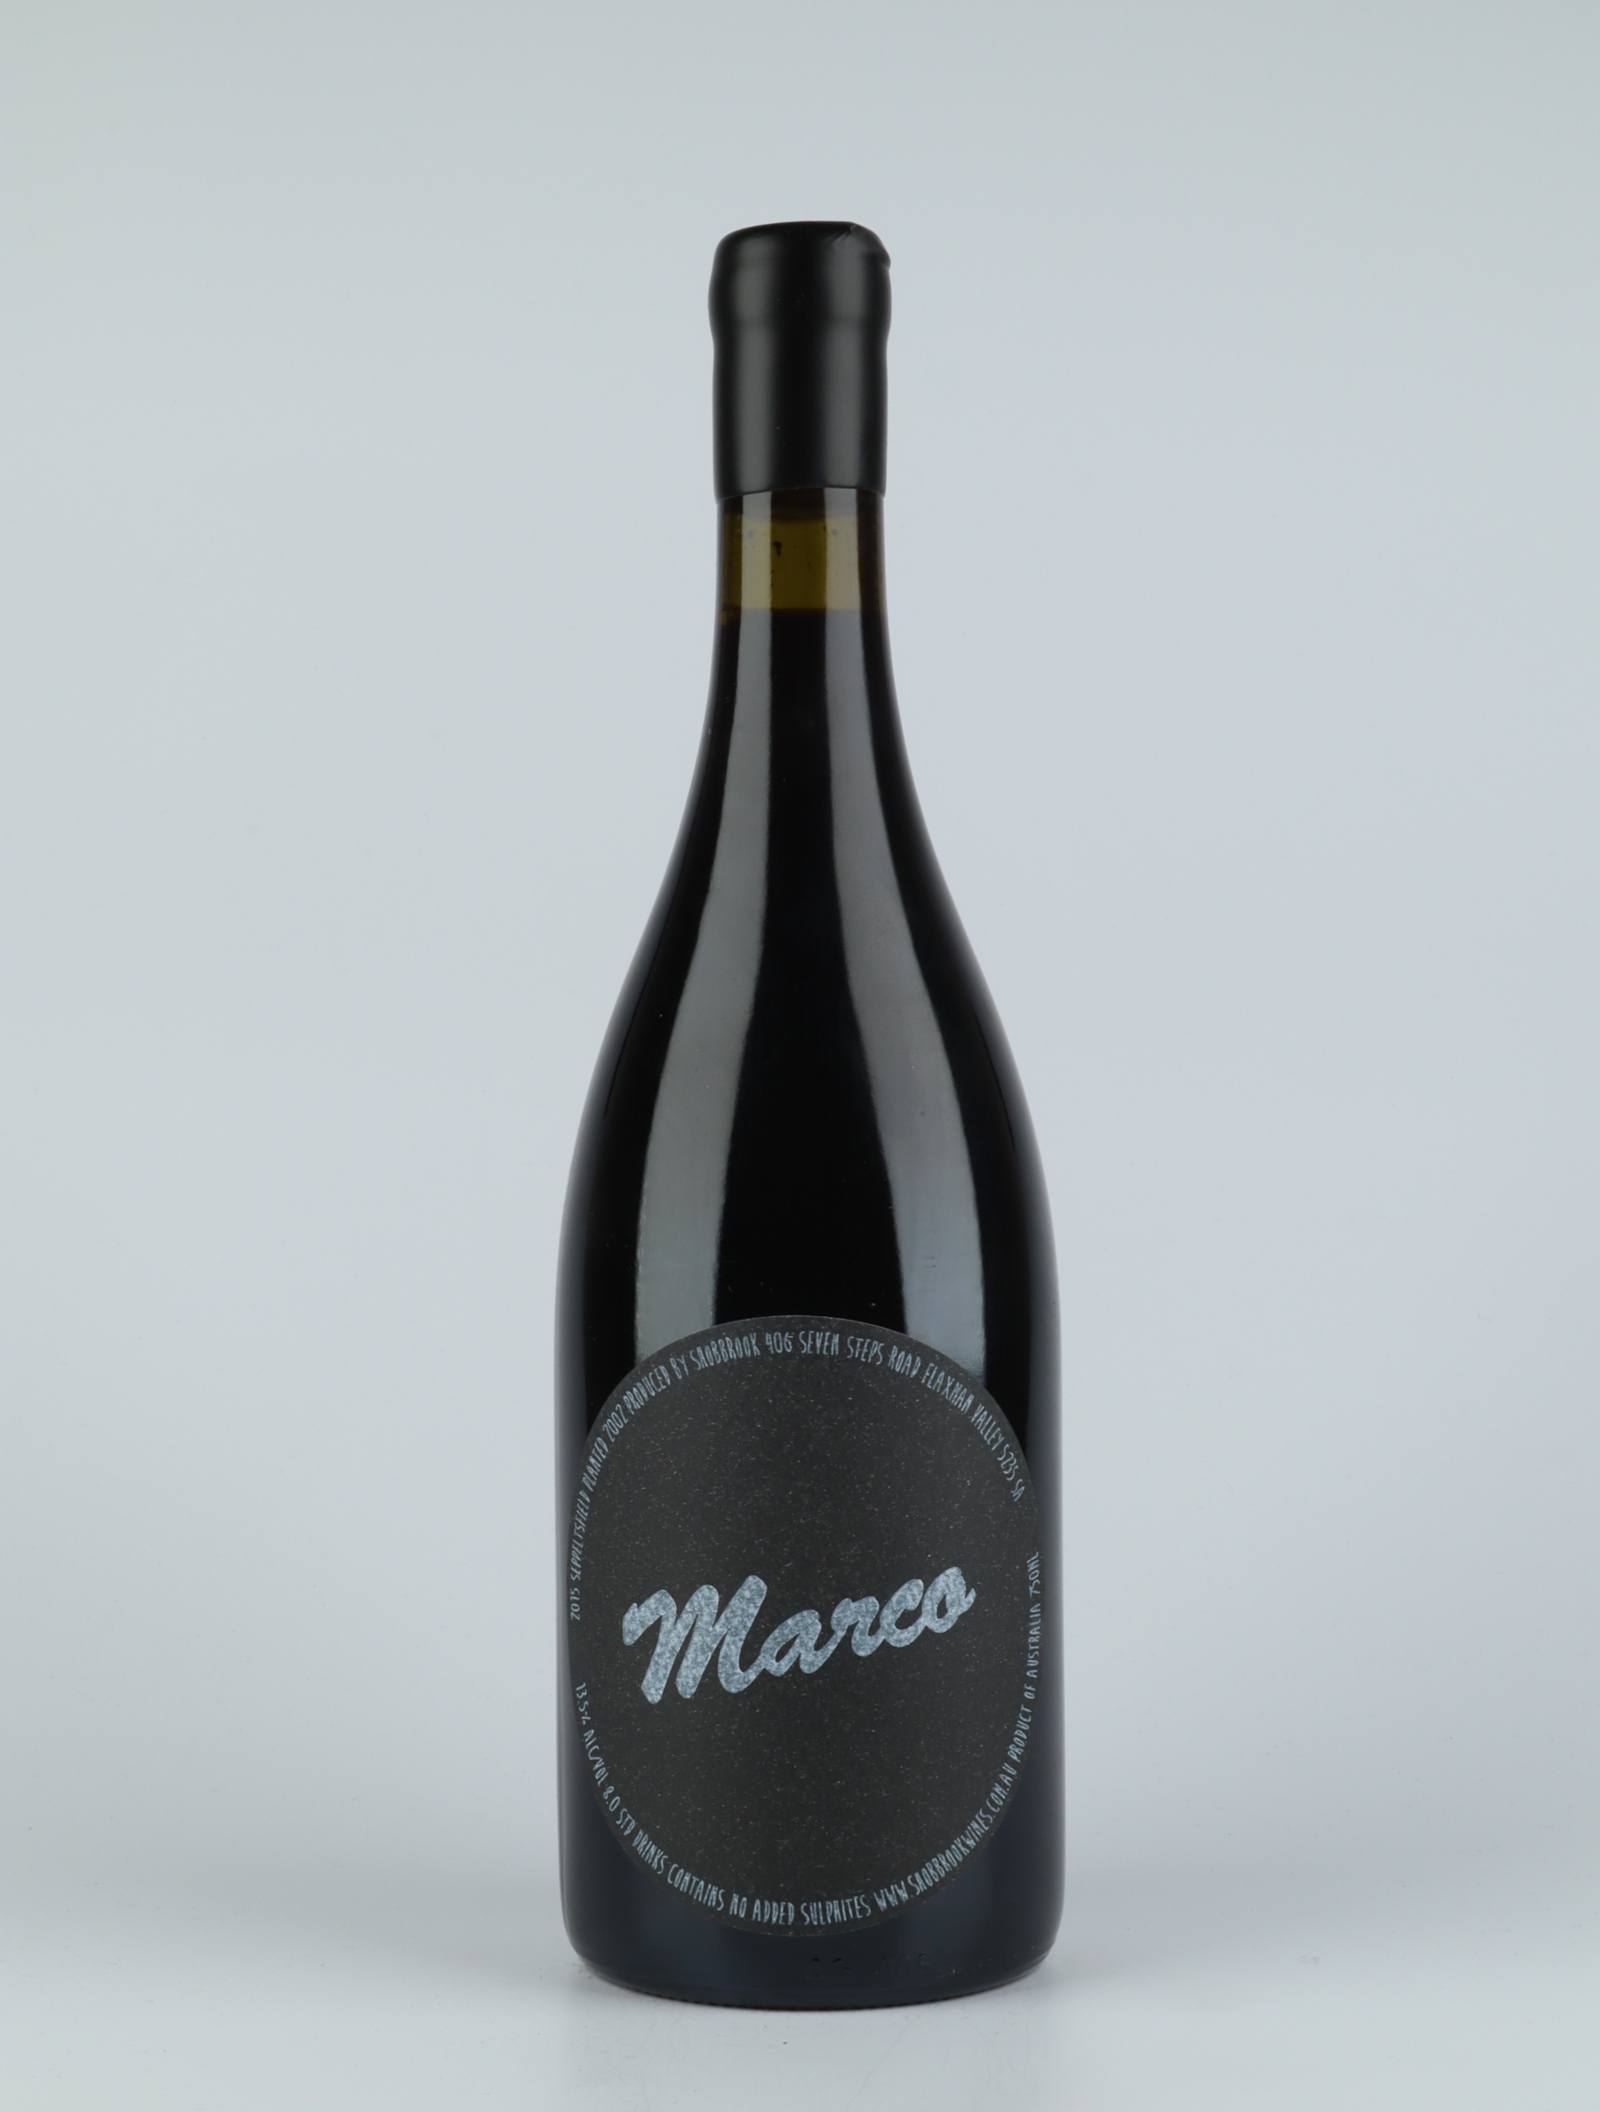 A bottle 2015 Marco Red wine from Tom Shobbrook, Barossa Valley in Australia